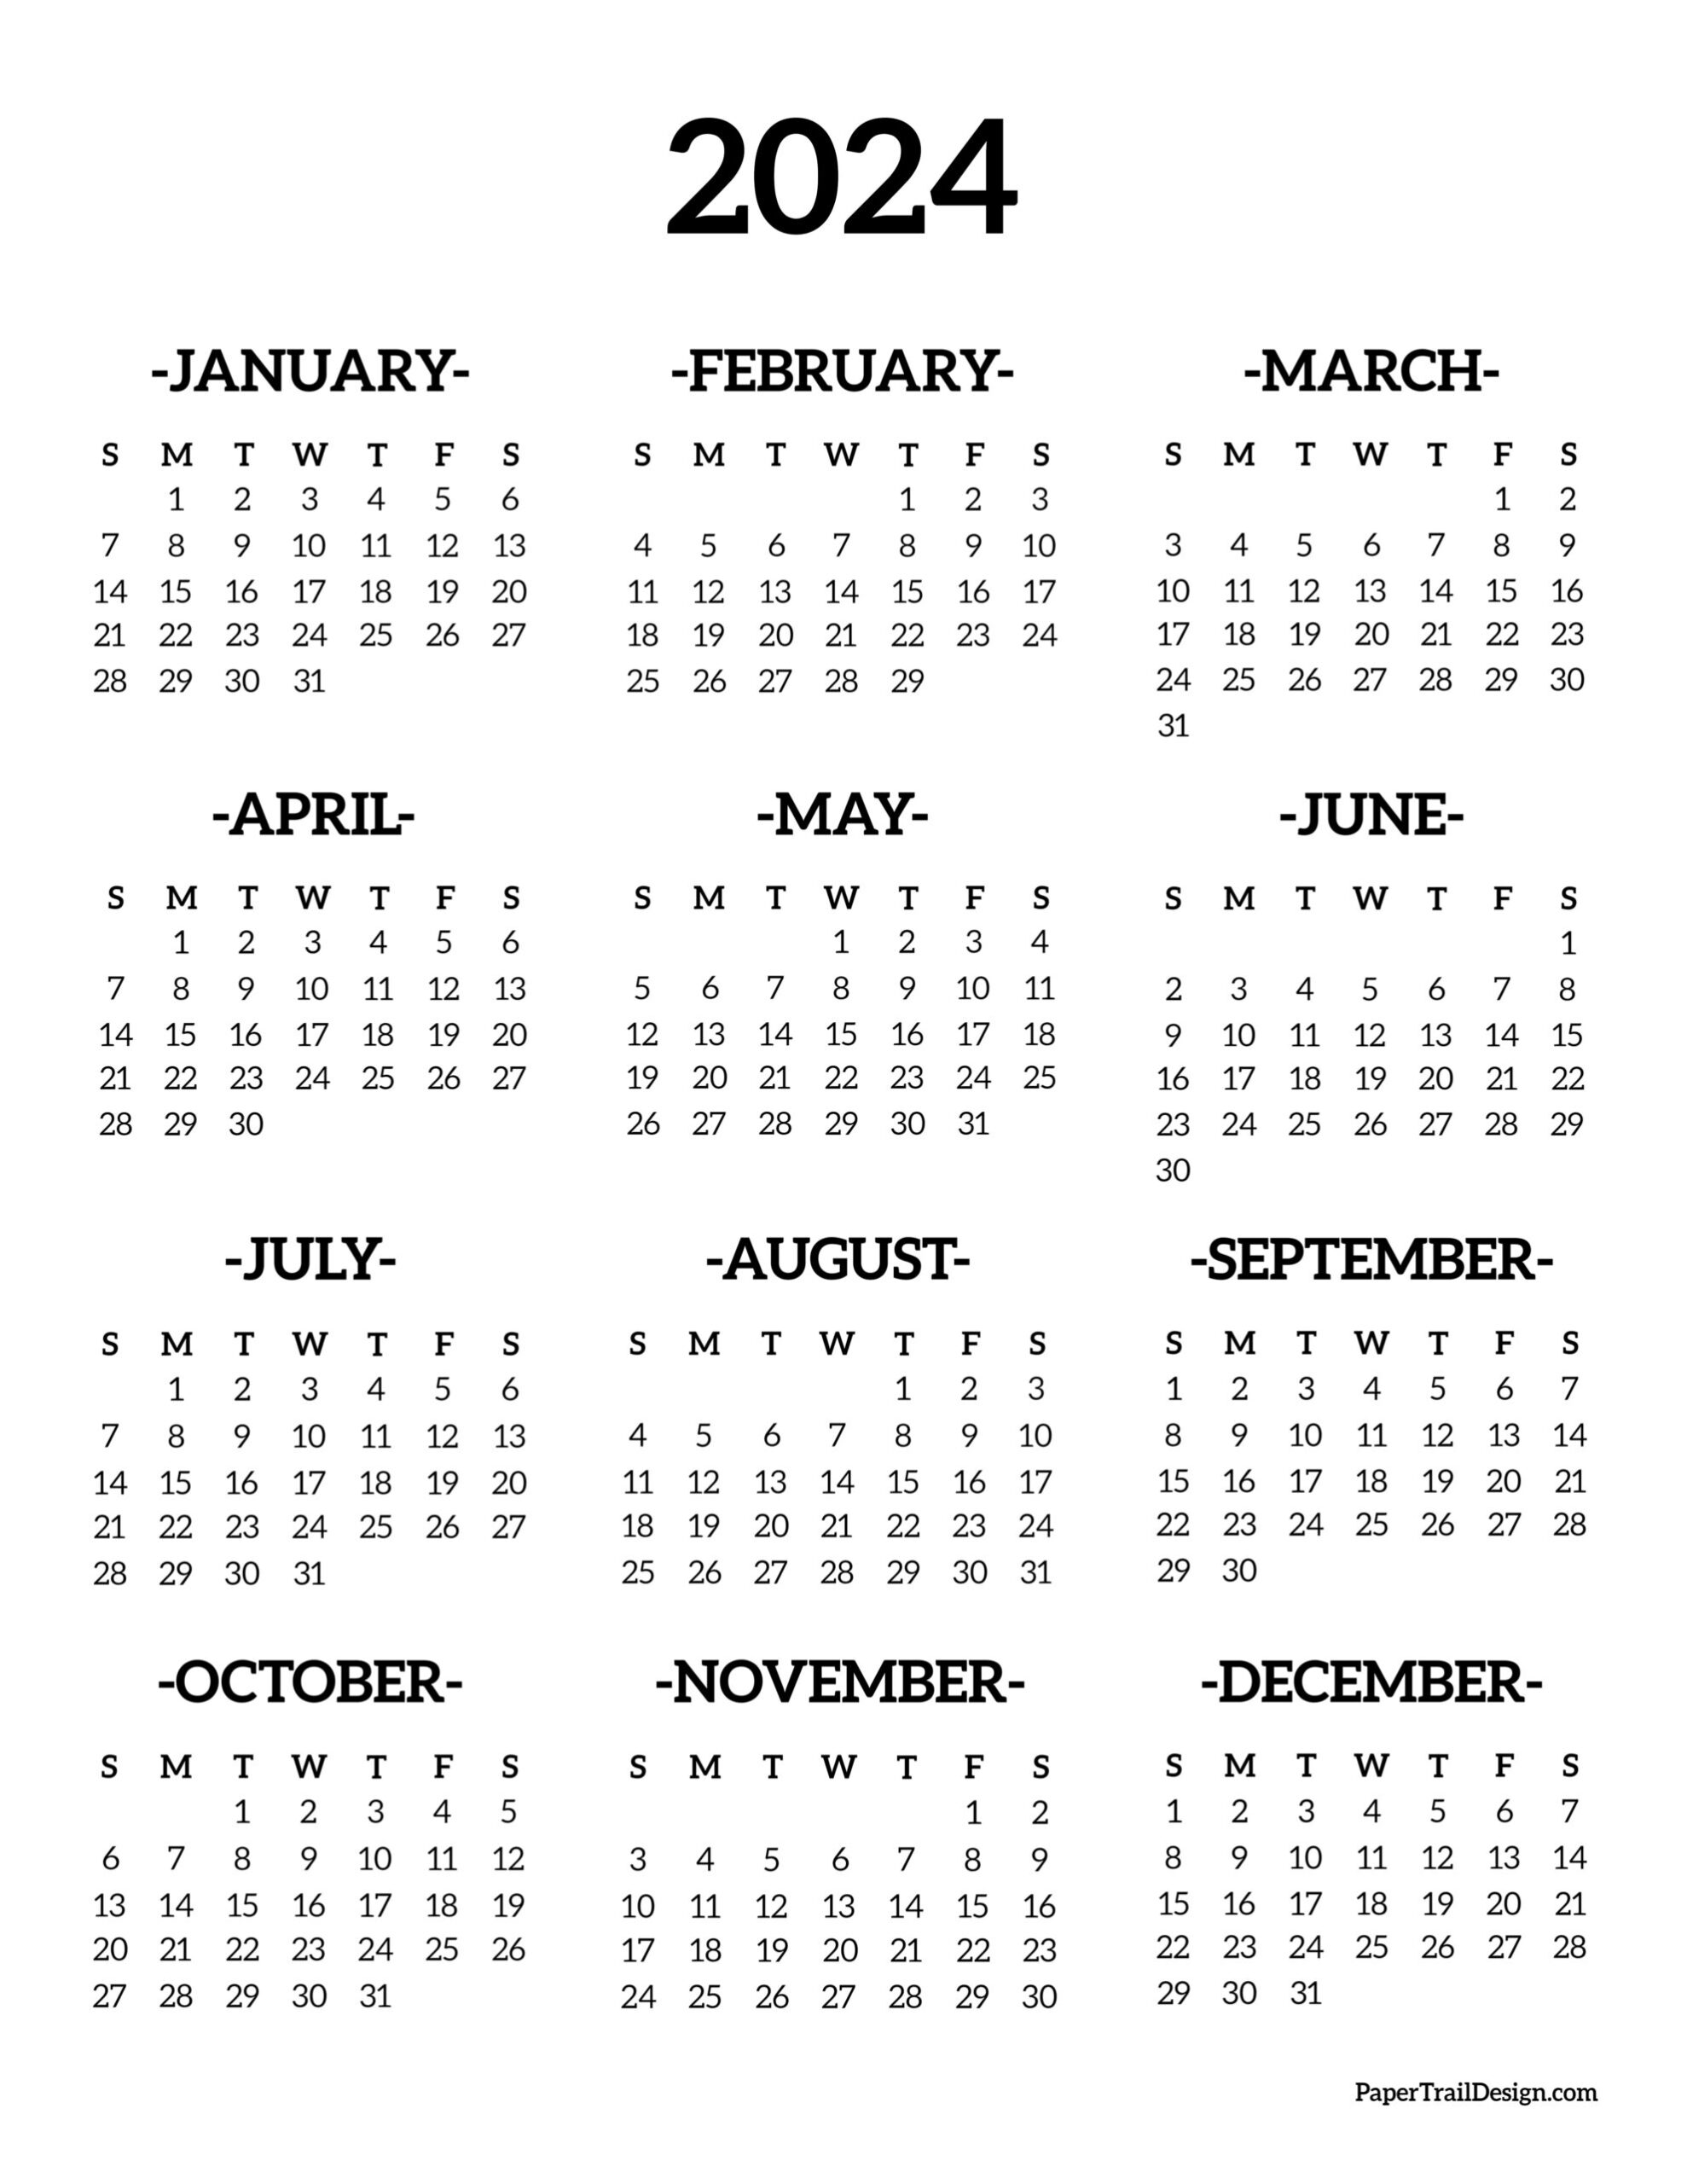 Calendar 2024 Printable One Page - Paper Trail Design for 2024 Printable Calendar Pages